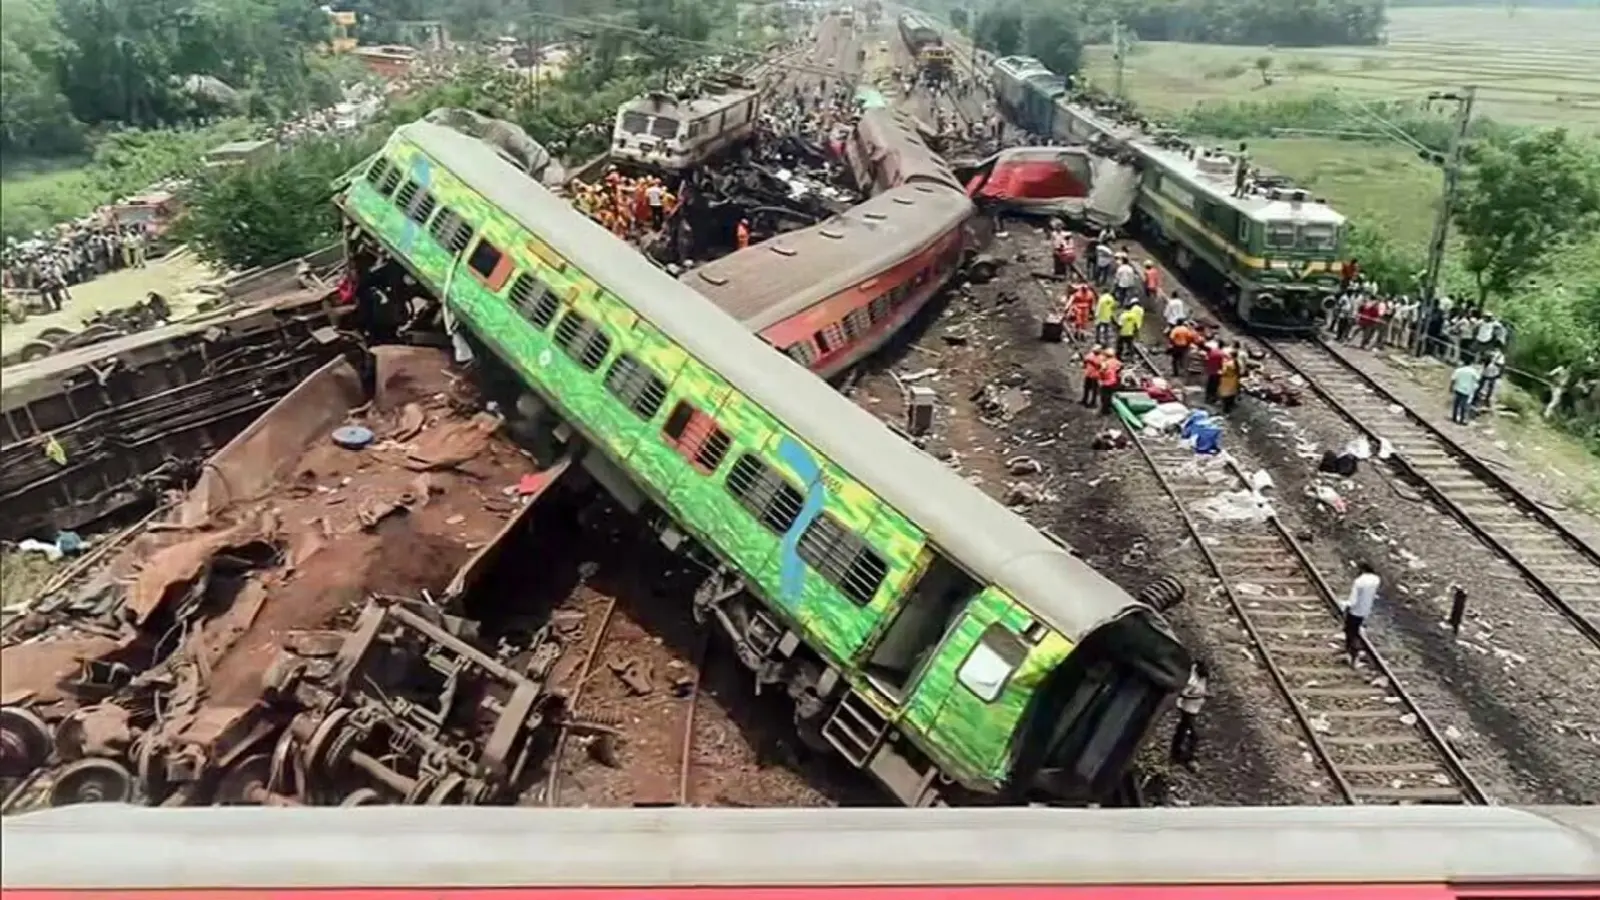 Prima Facie Evidence Of “Some Interference” In The Signal System In Odisha Train Accident: Railway Board